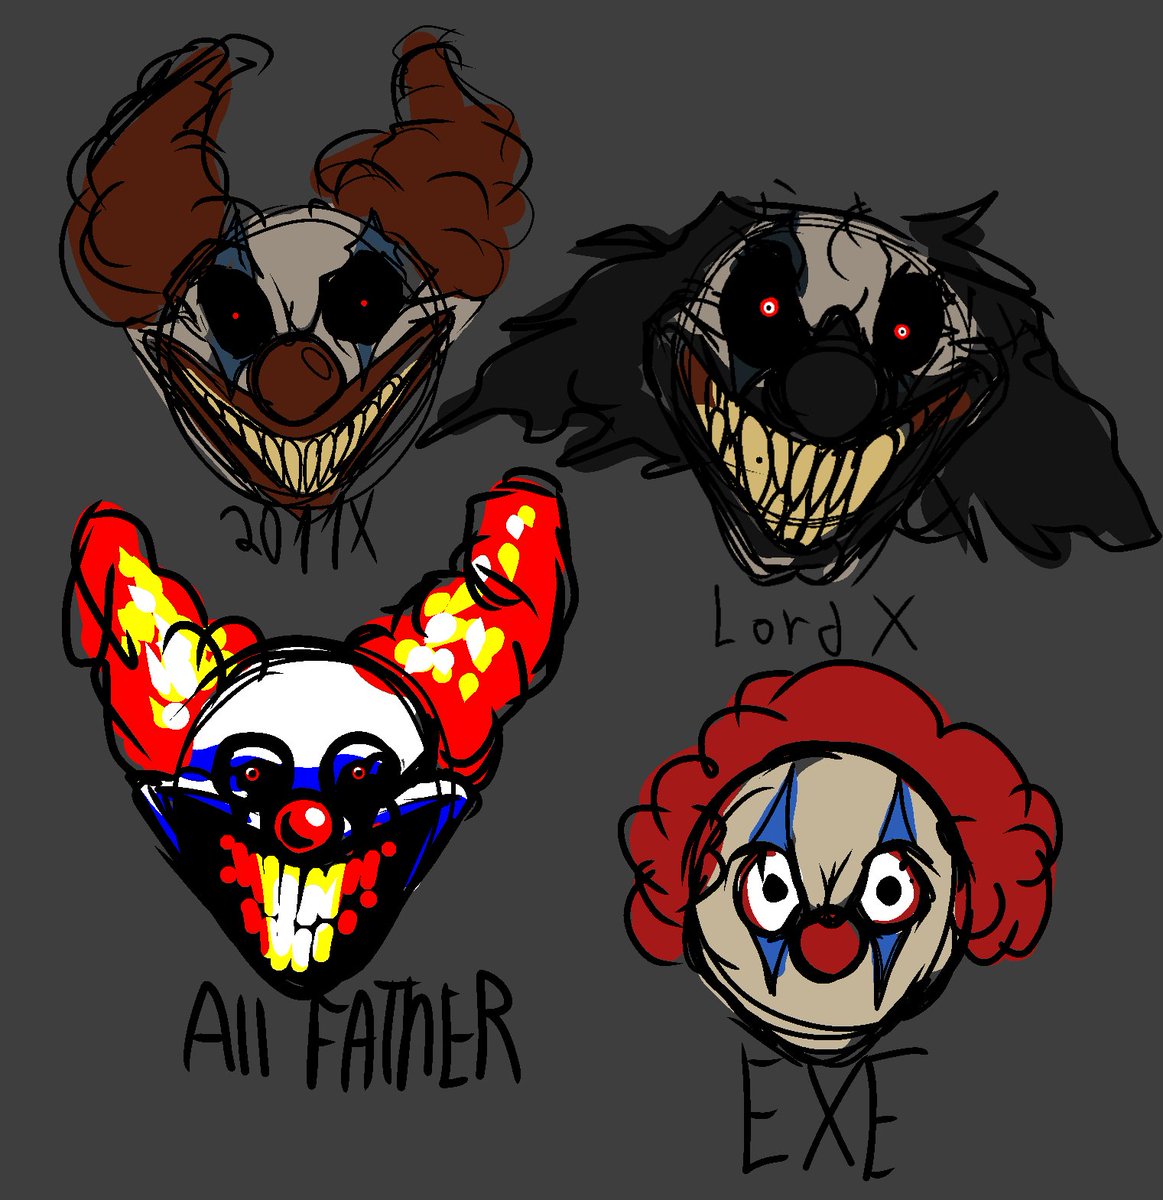 Exes if they were like, killer clown or smt